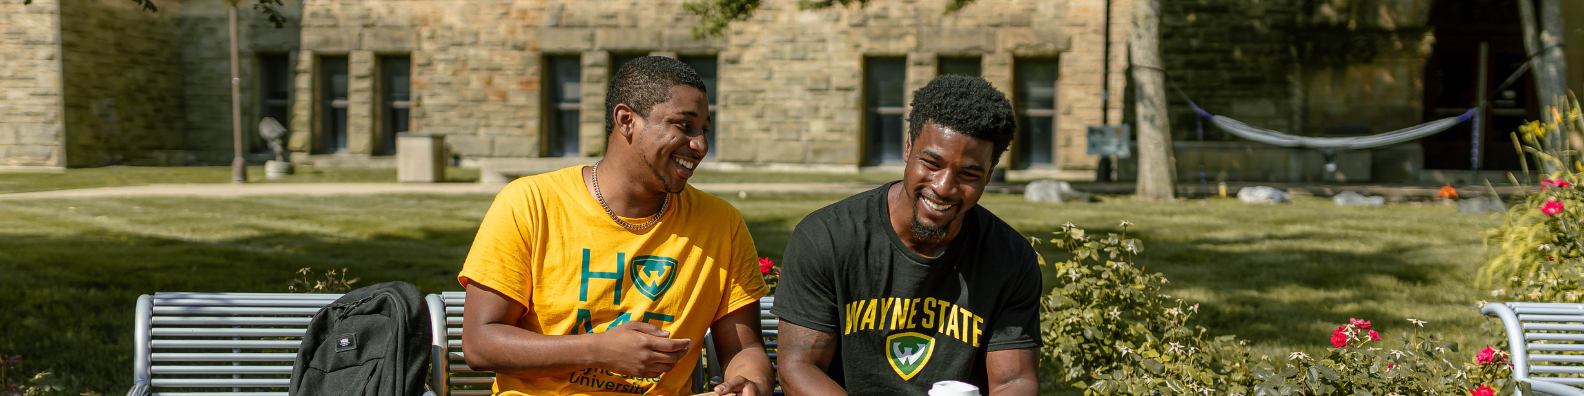 Two Black male students